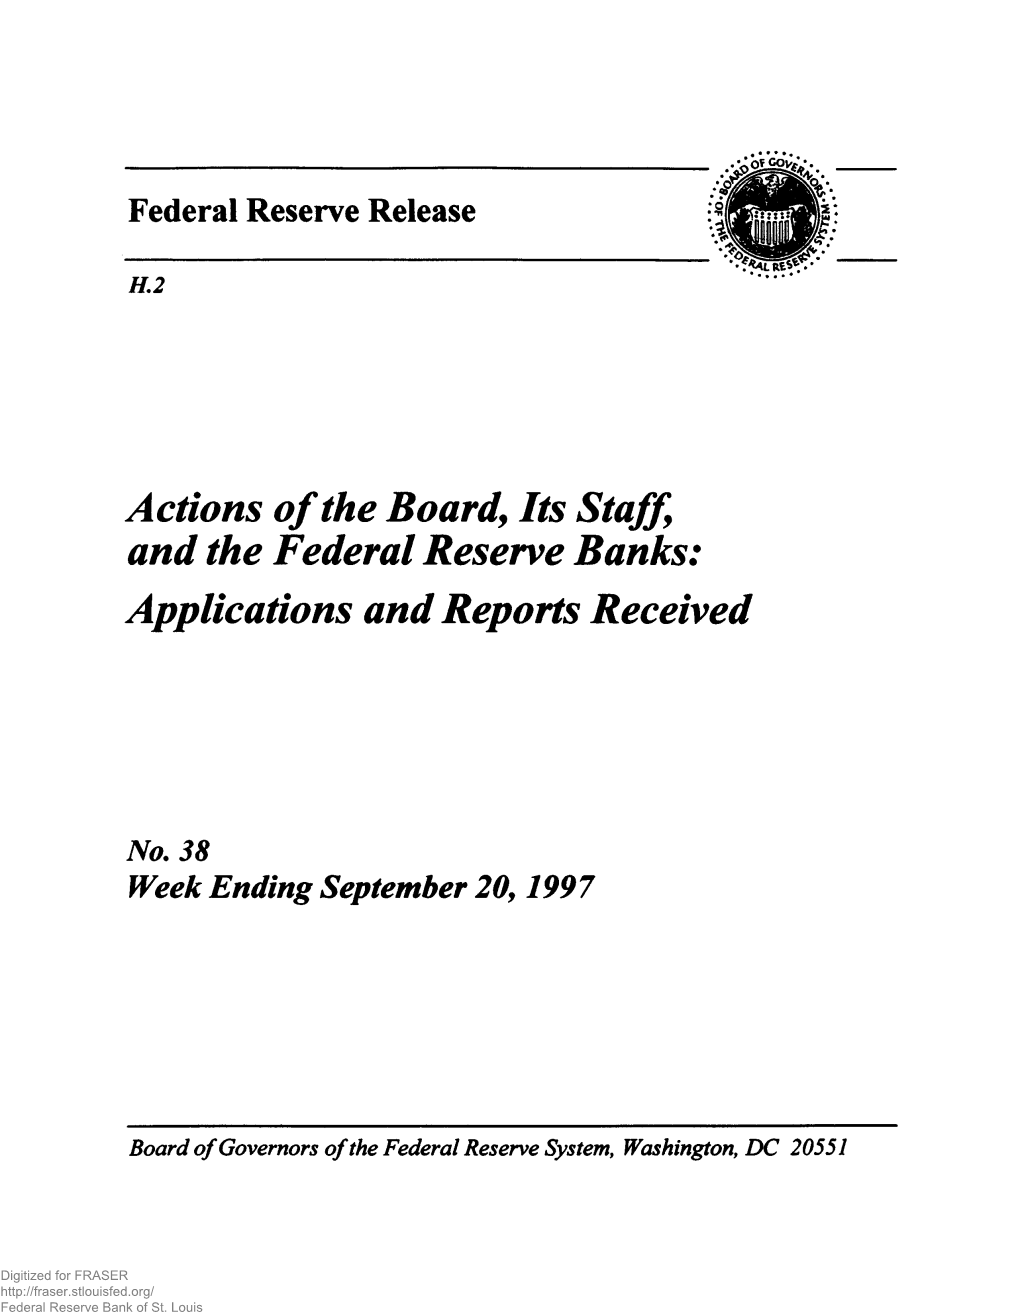 H.2 Actions of the Board, Its Staff, and the Federal Reserve Banks